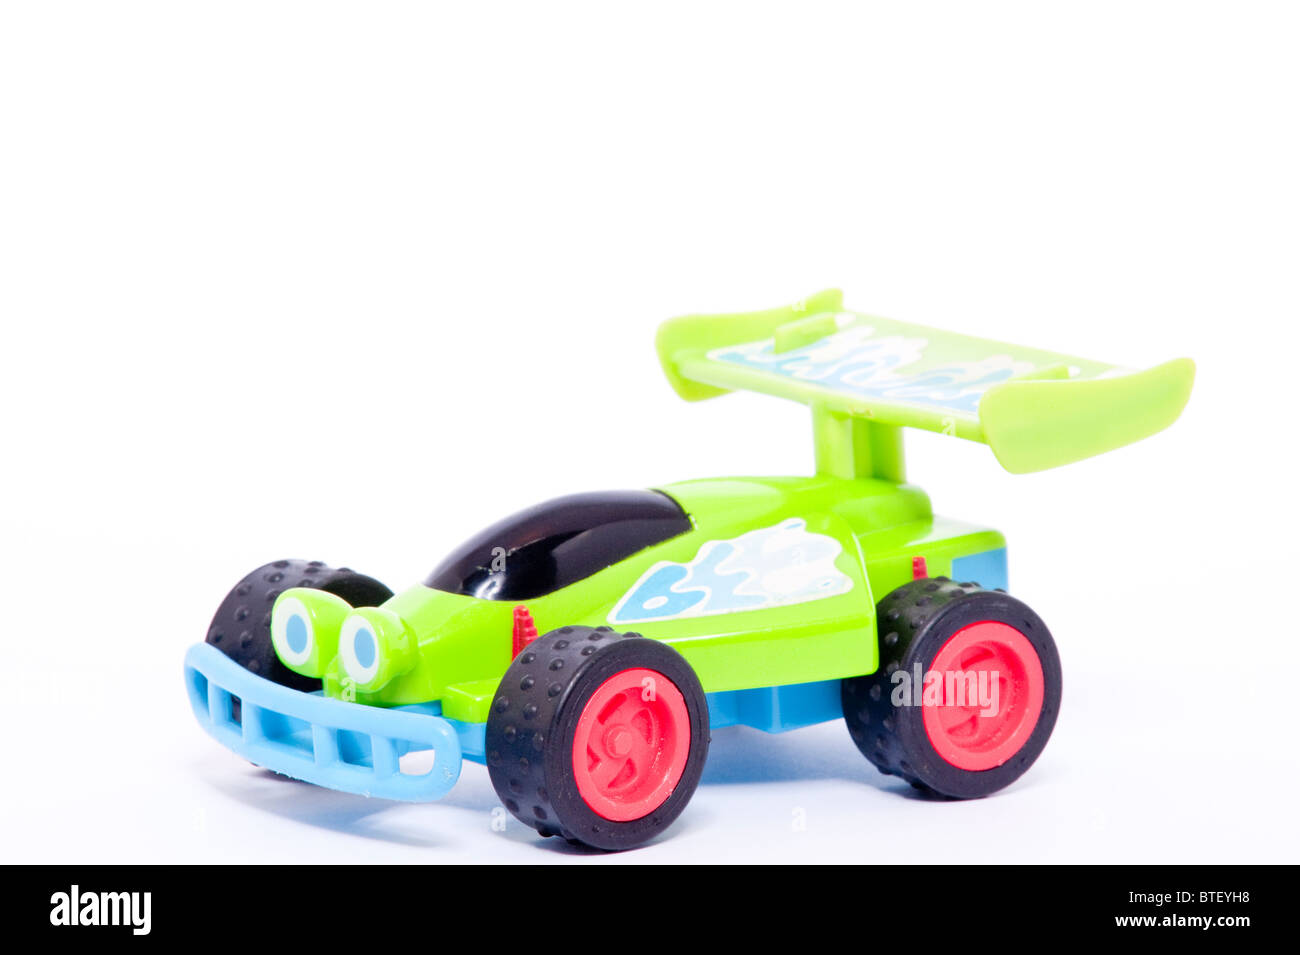 A close up photo of a childs toy RC car buggy from the Toy Story films  against a white background Stock Photo - Alamy